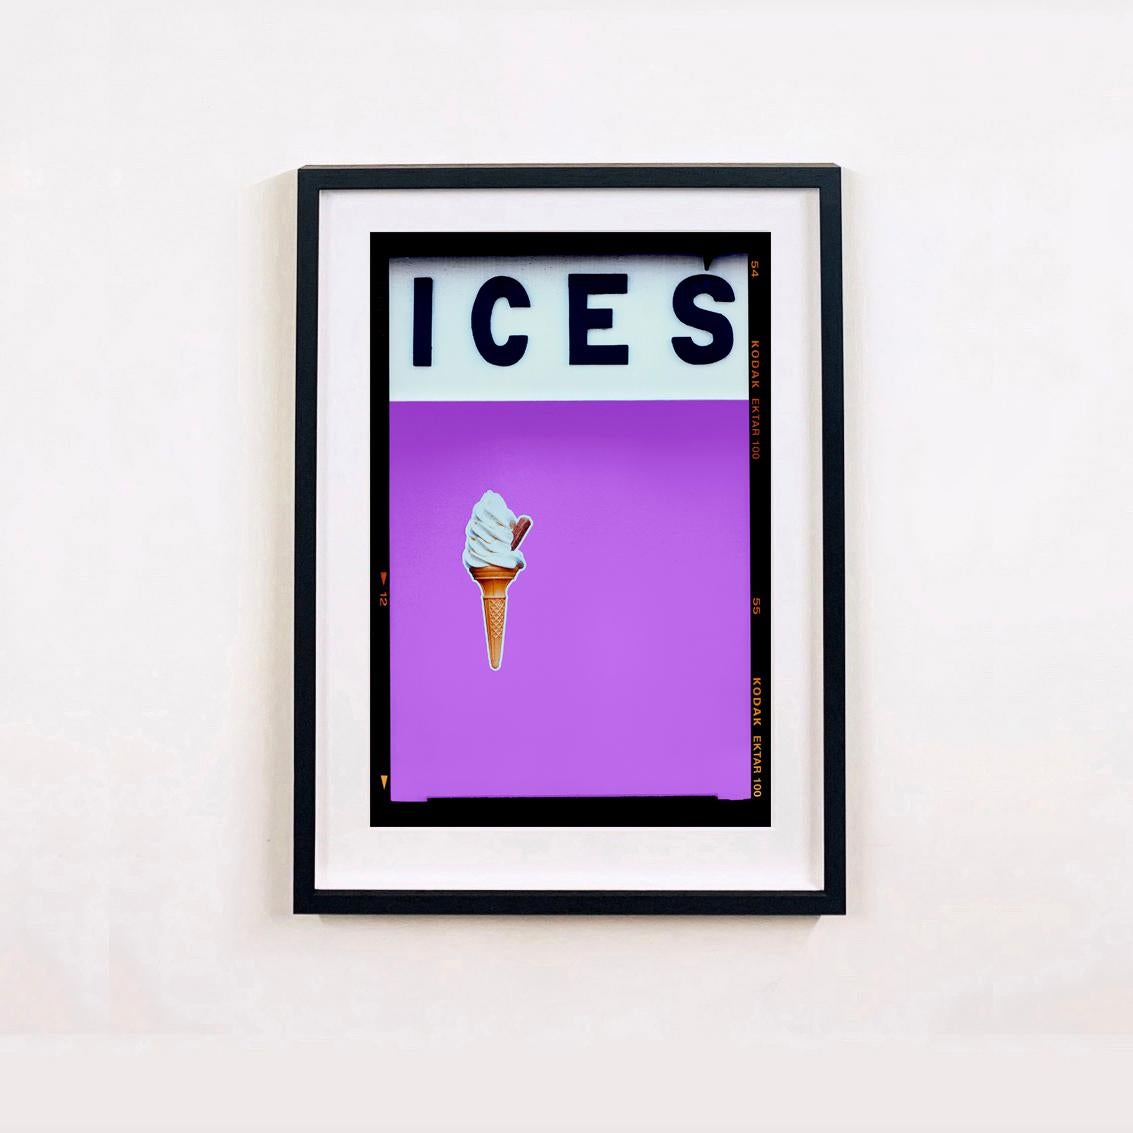 Ices (Lilac), Bexhill-on-Sea - British seaside color photography - Photograph by Richard Heeps